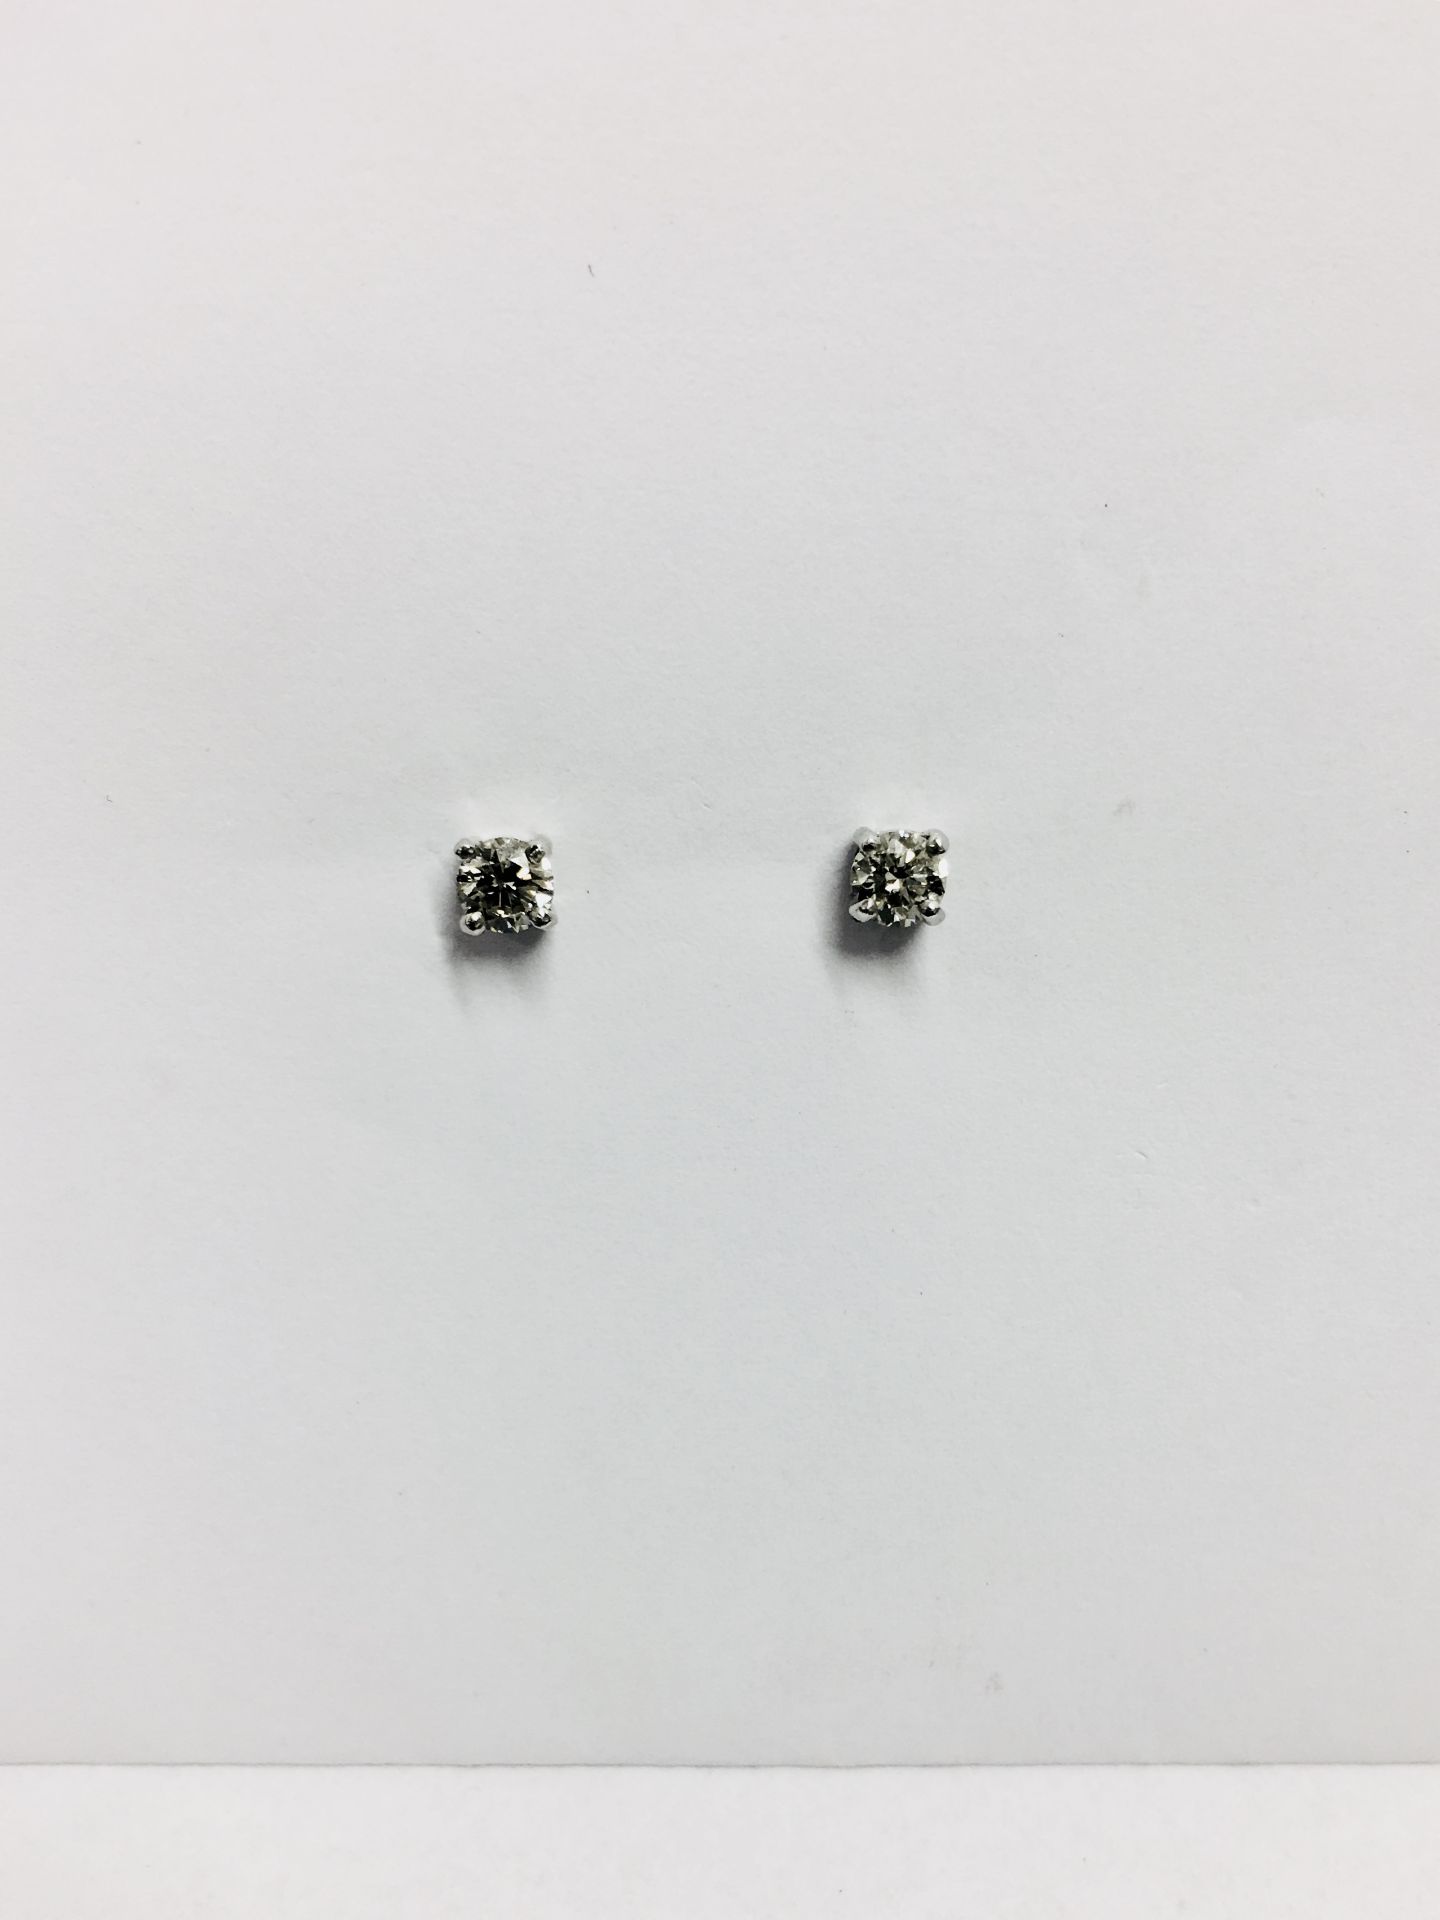 0.30ct Solitaire diamond stud earrings set with brilliant cut diamonds, i1 clarity and I colour. Set